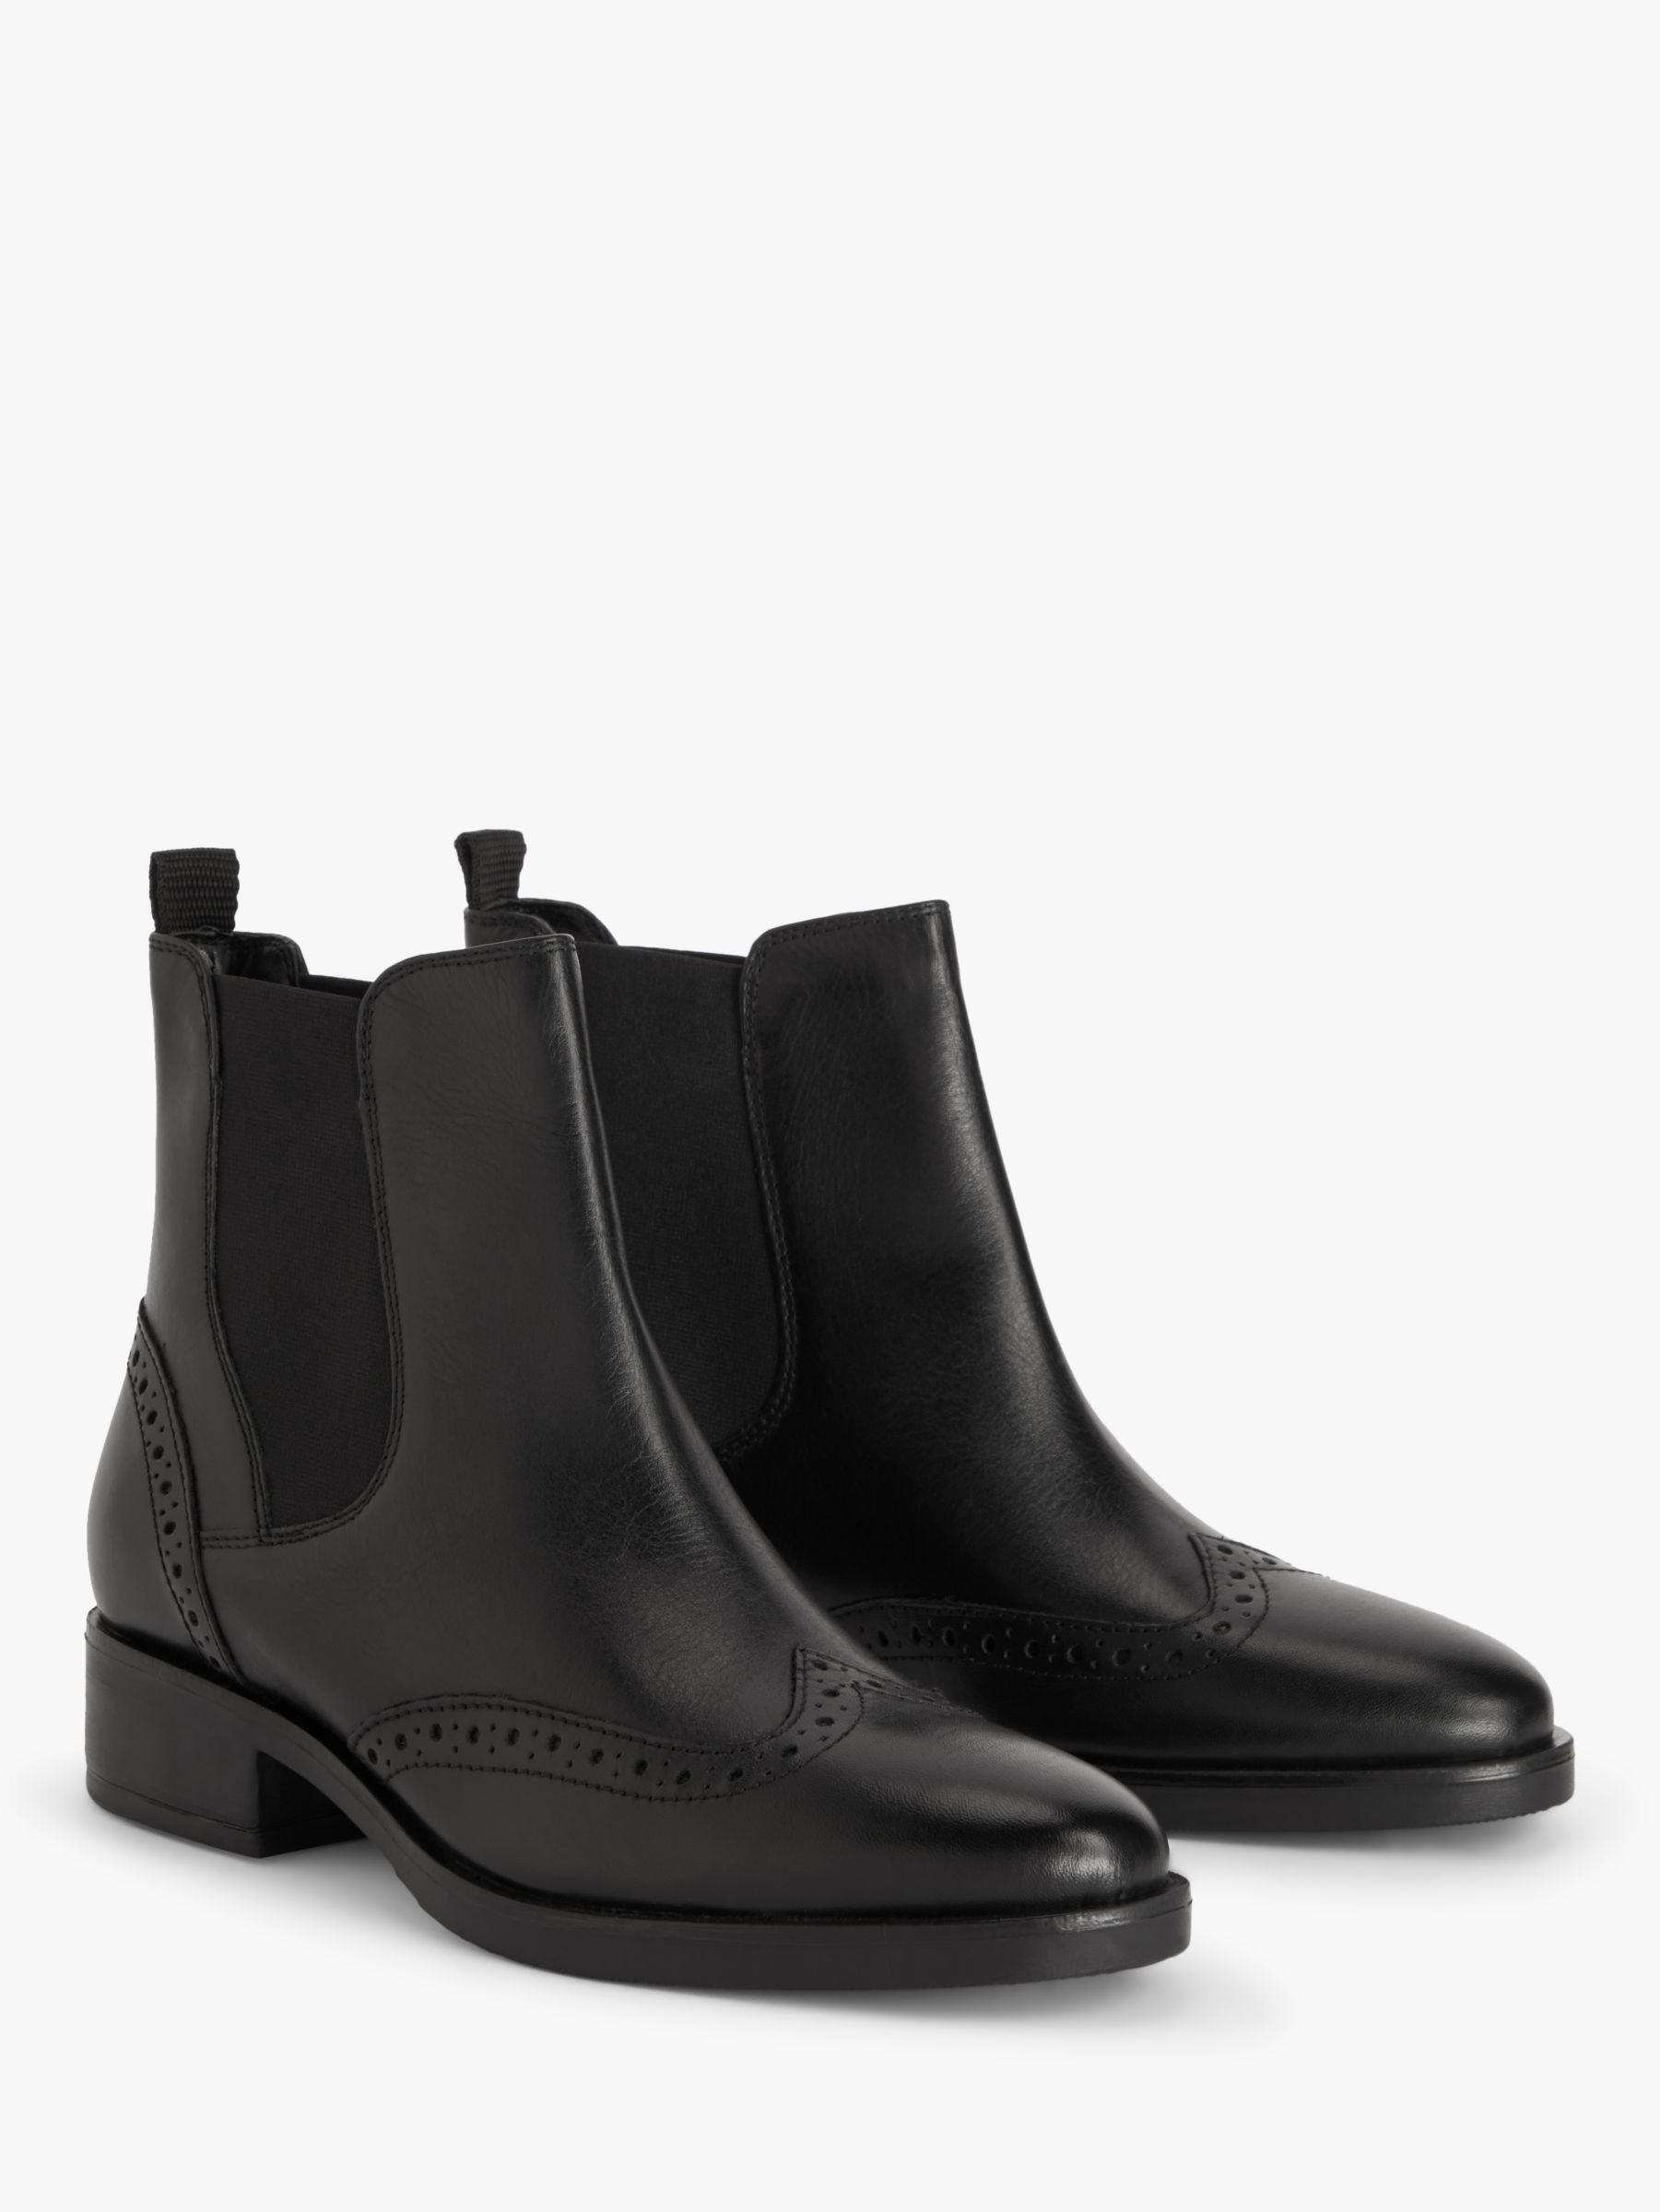 John Lewis Pheebs Leather Brogue Detail Chelsea Boots